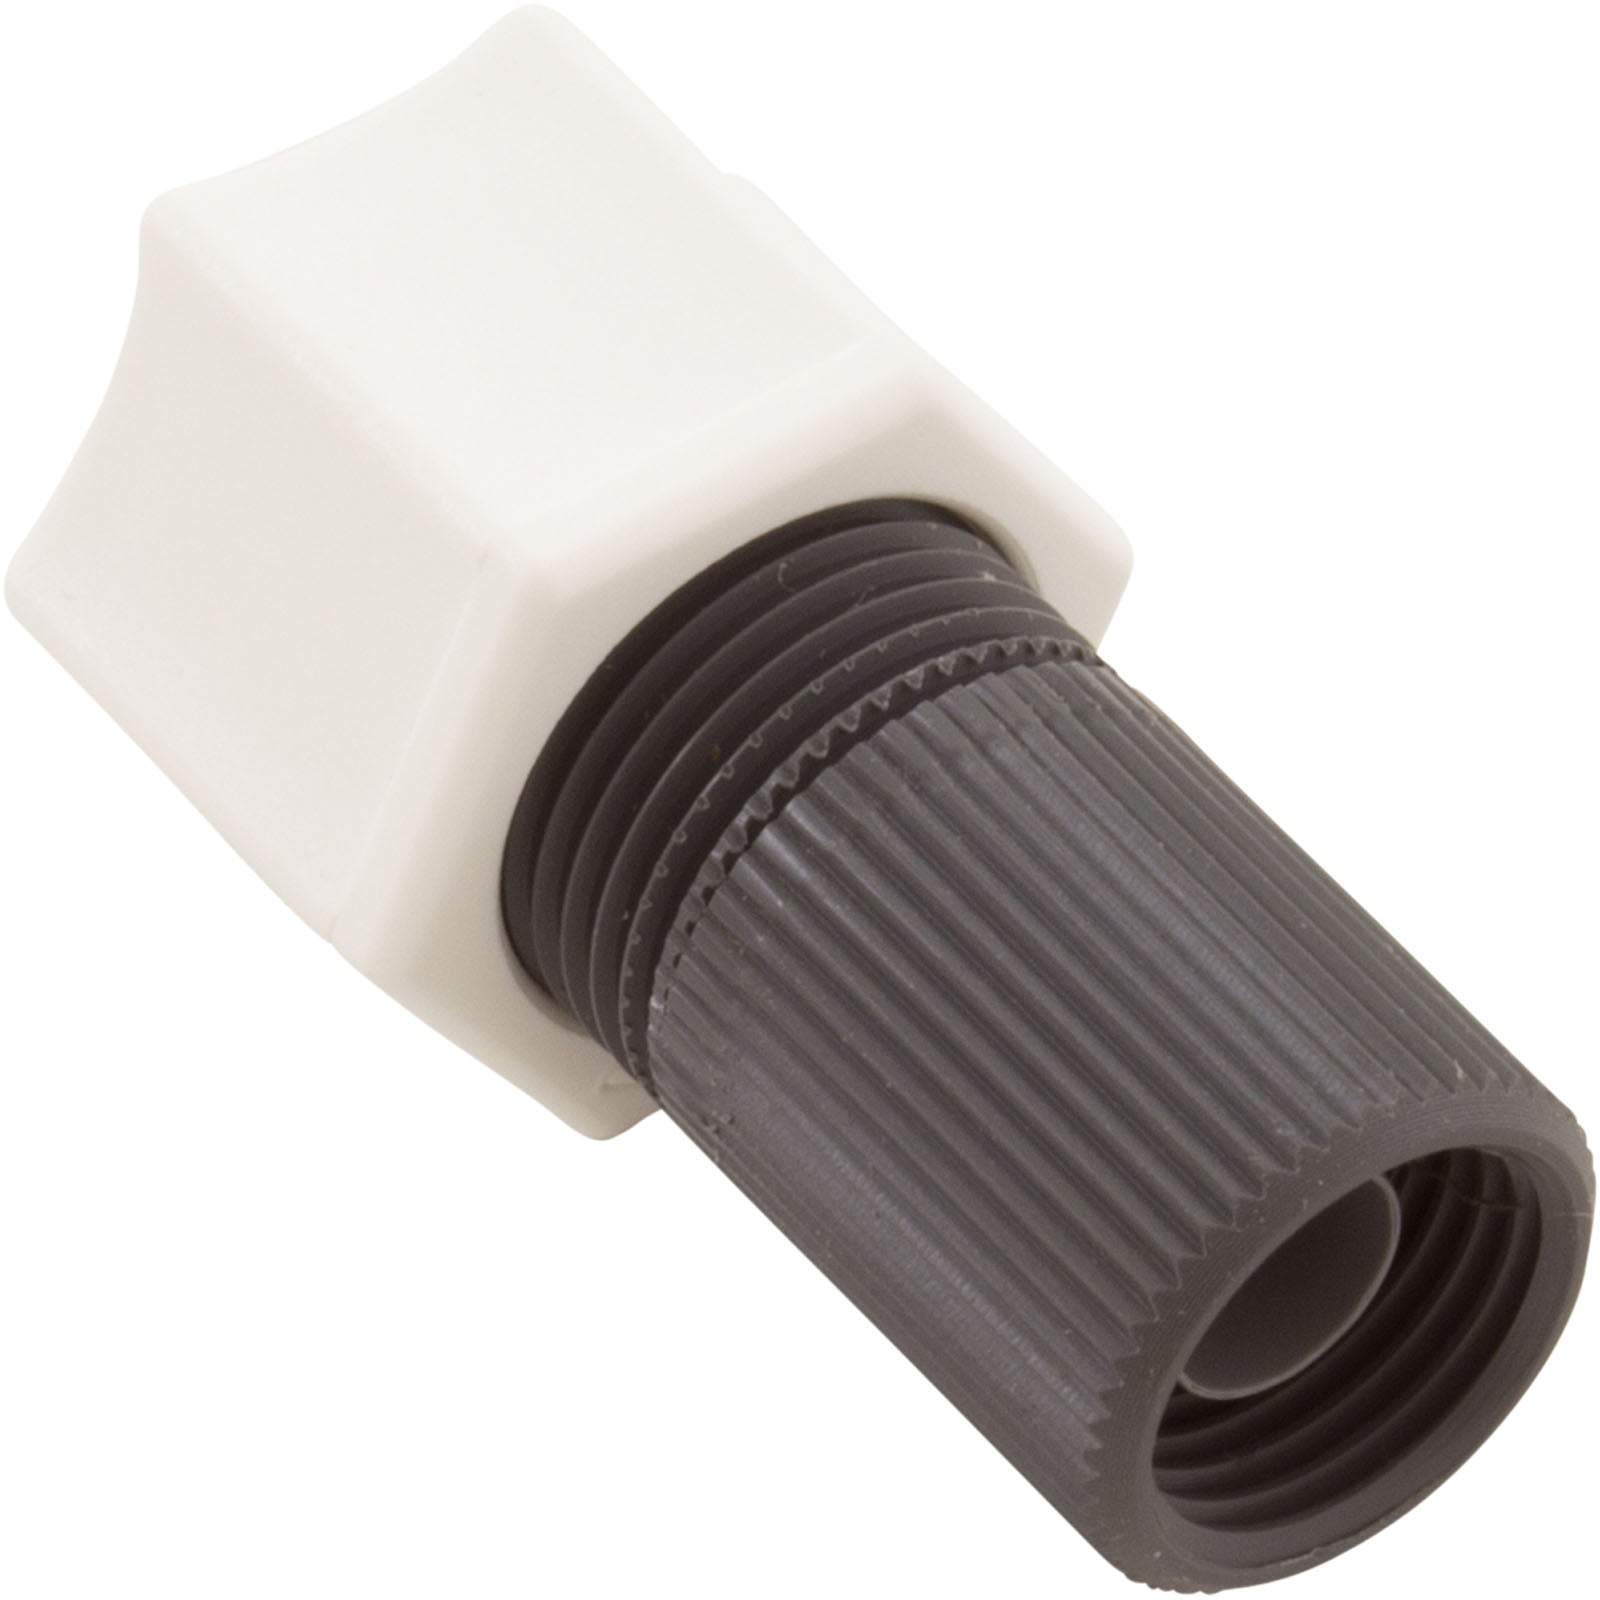 Connecting Nut, Qty 5, Stenner, 3/8", w/ 1/4" Adapter,  MCADPTR